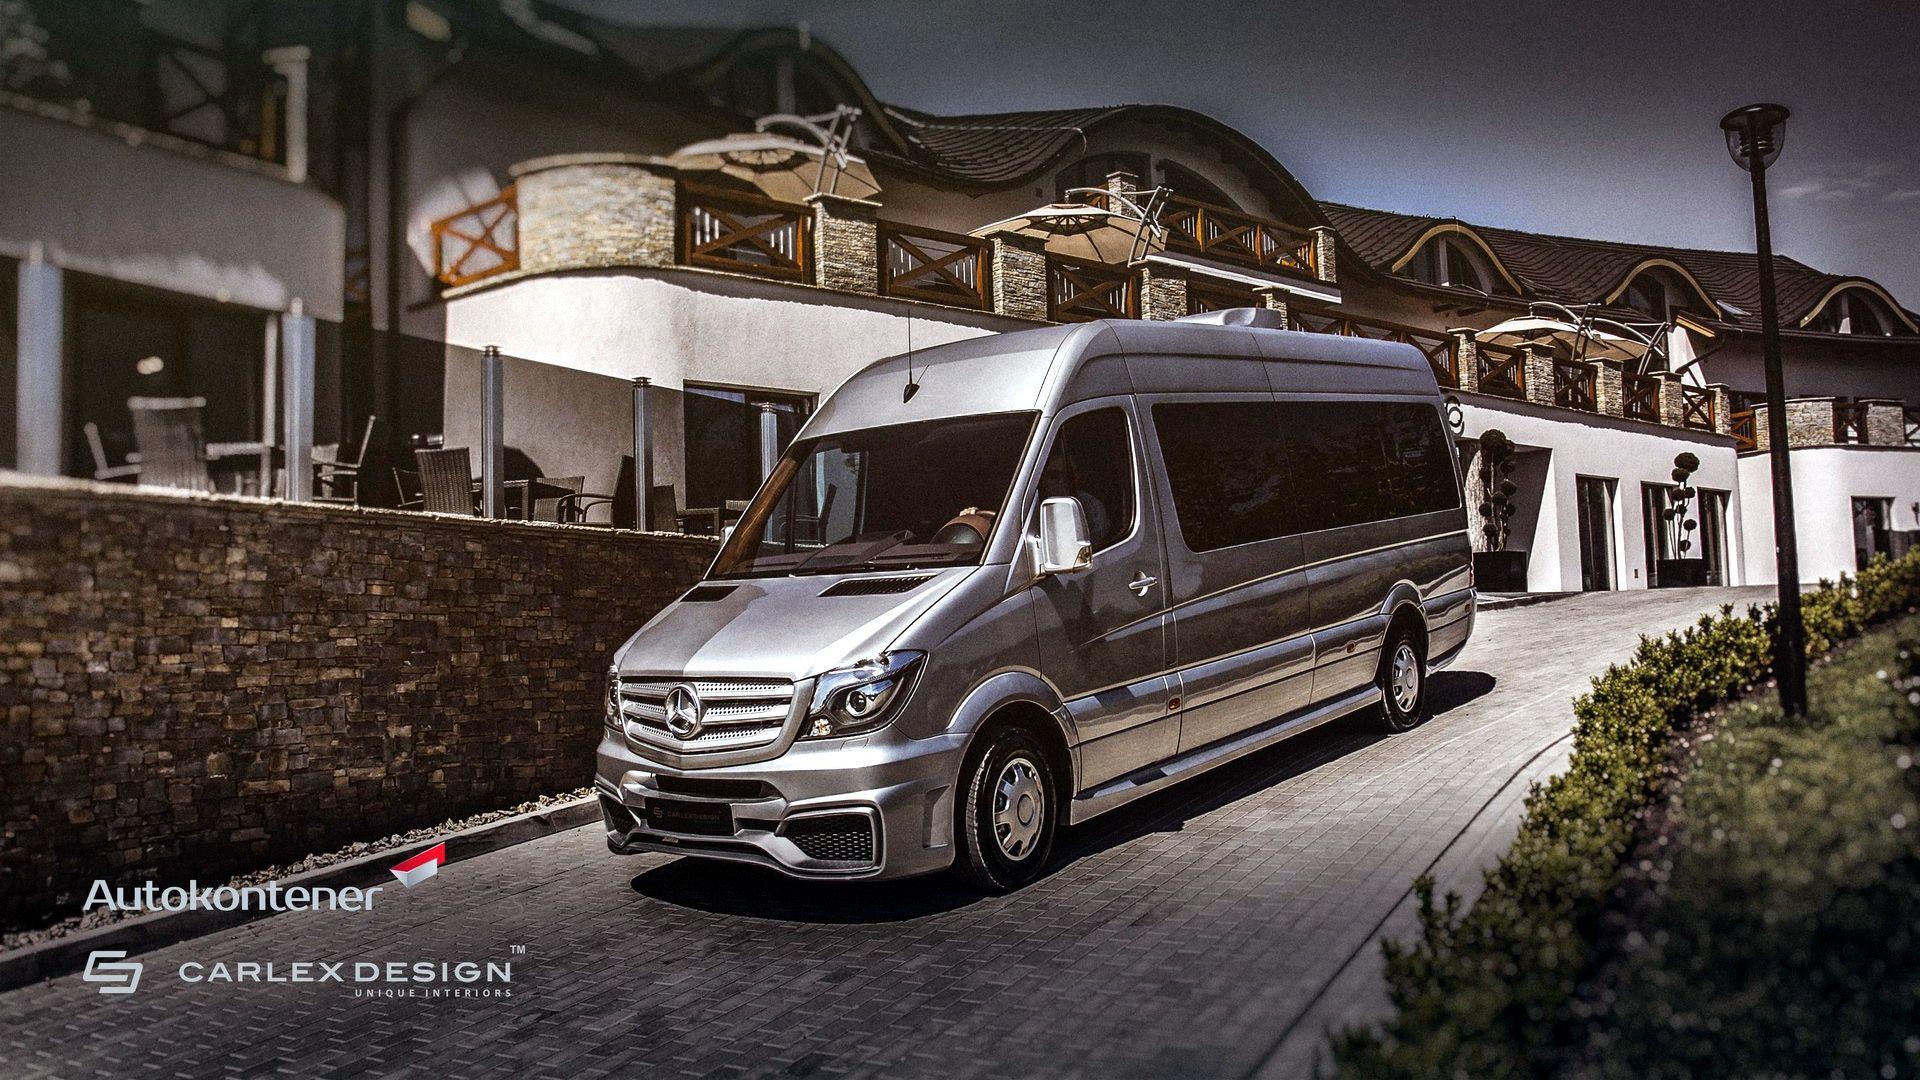 Enjoy A Cocktail In The Back Of This Swanky Mercedes Sprinter